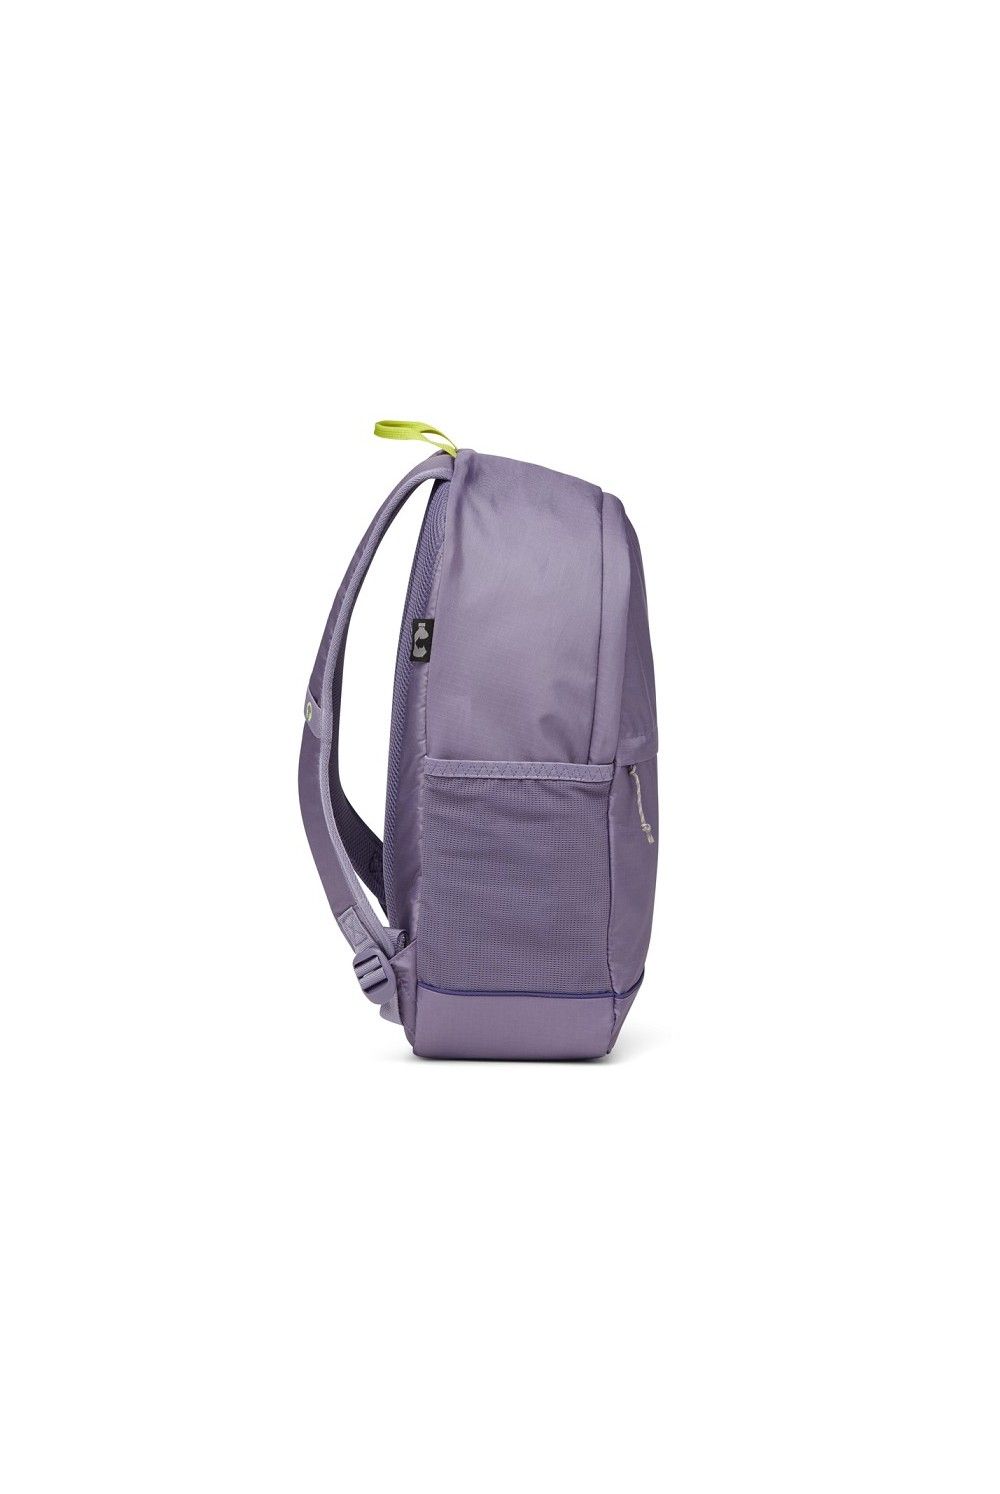 Satch Backpack Fly Ripstop Lilac